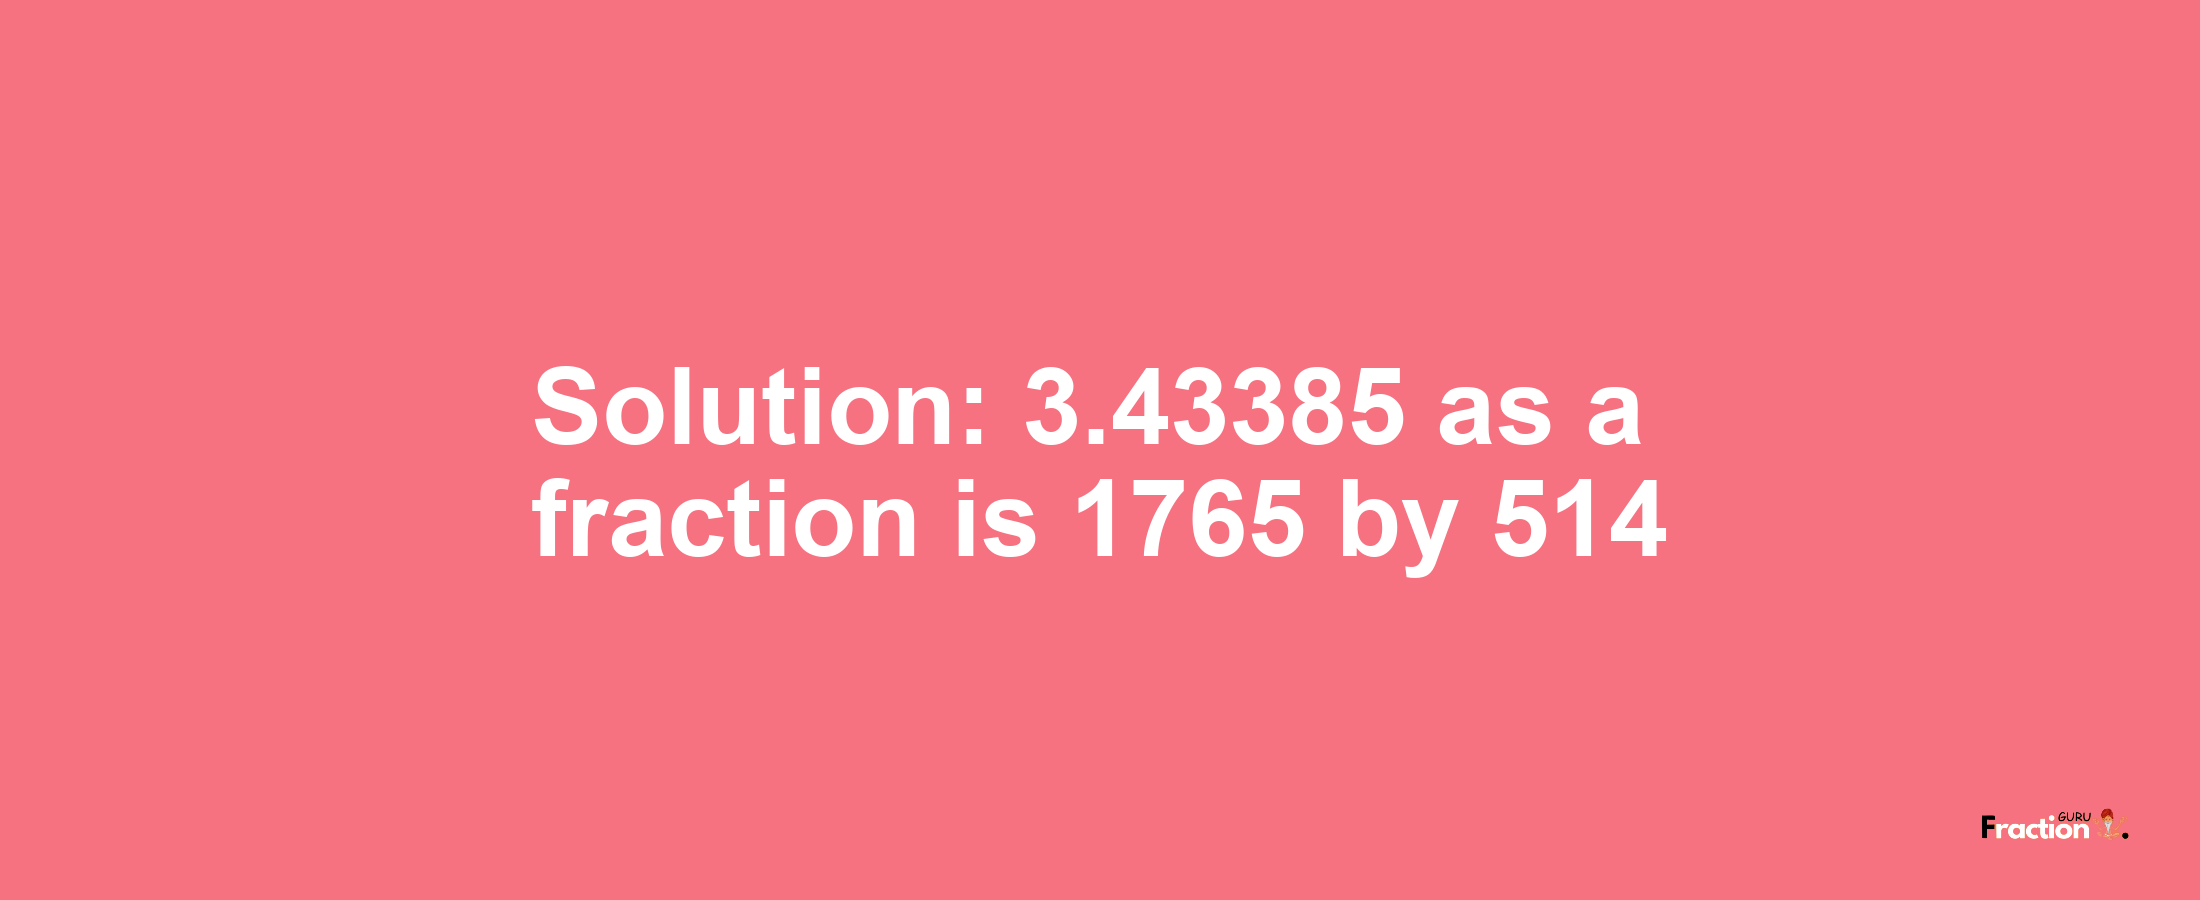 Solution:3.43385 as a fraction is 1765/514